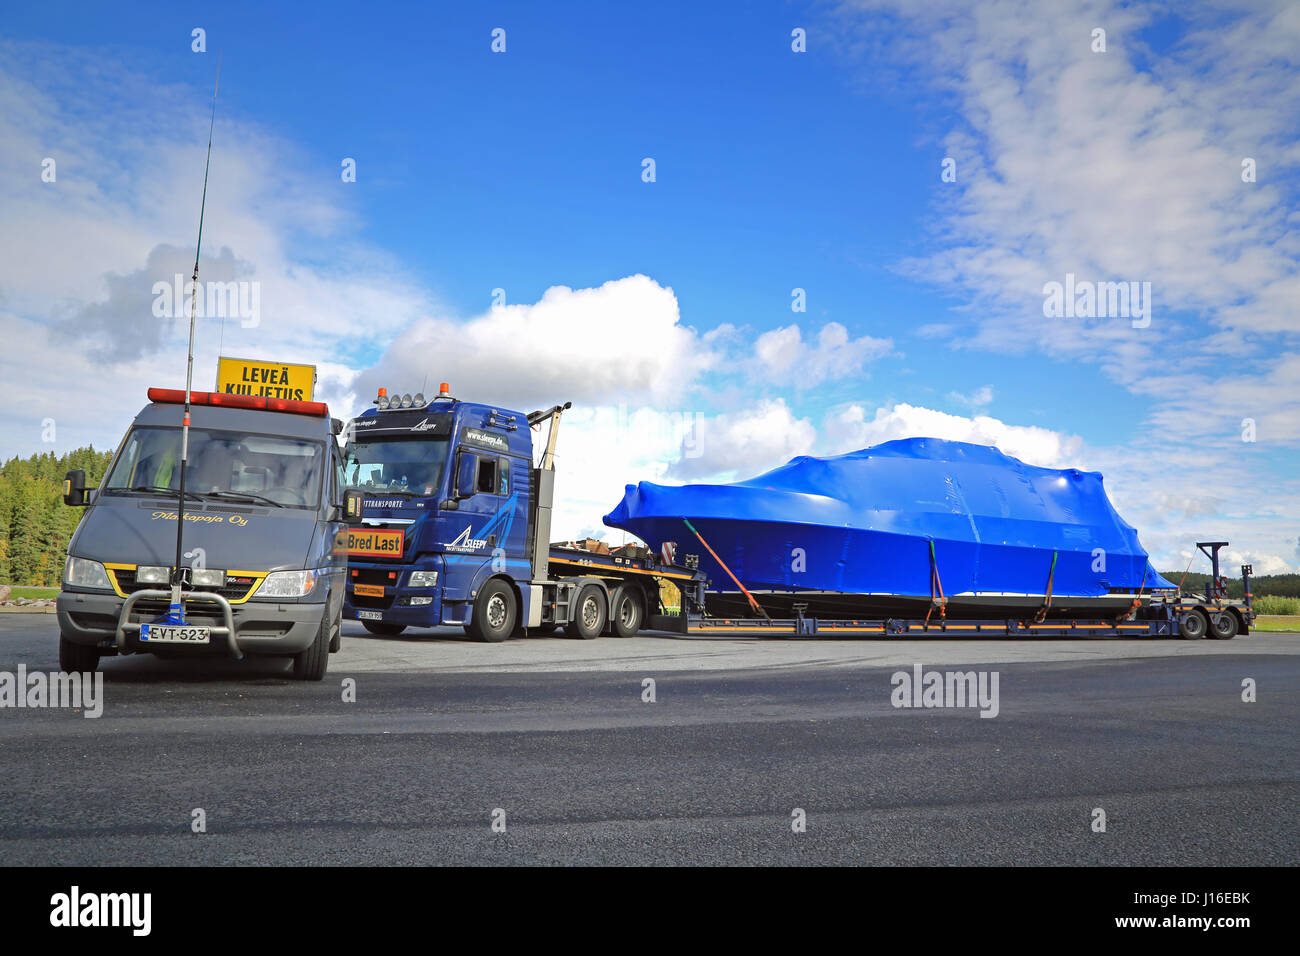 FORSSA, FINLAND - SEPTEMBER 19, 2015: Pilot car and exceptional load are about to leave a  truck stop. One pilot vehicle with height measuring pole is Stock Photo